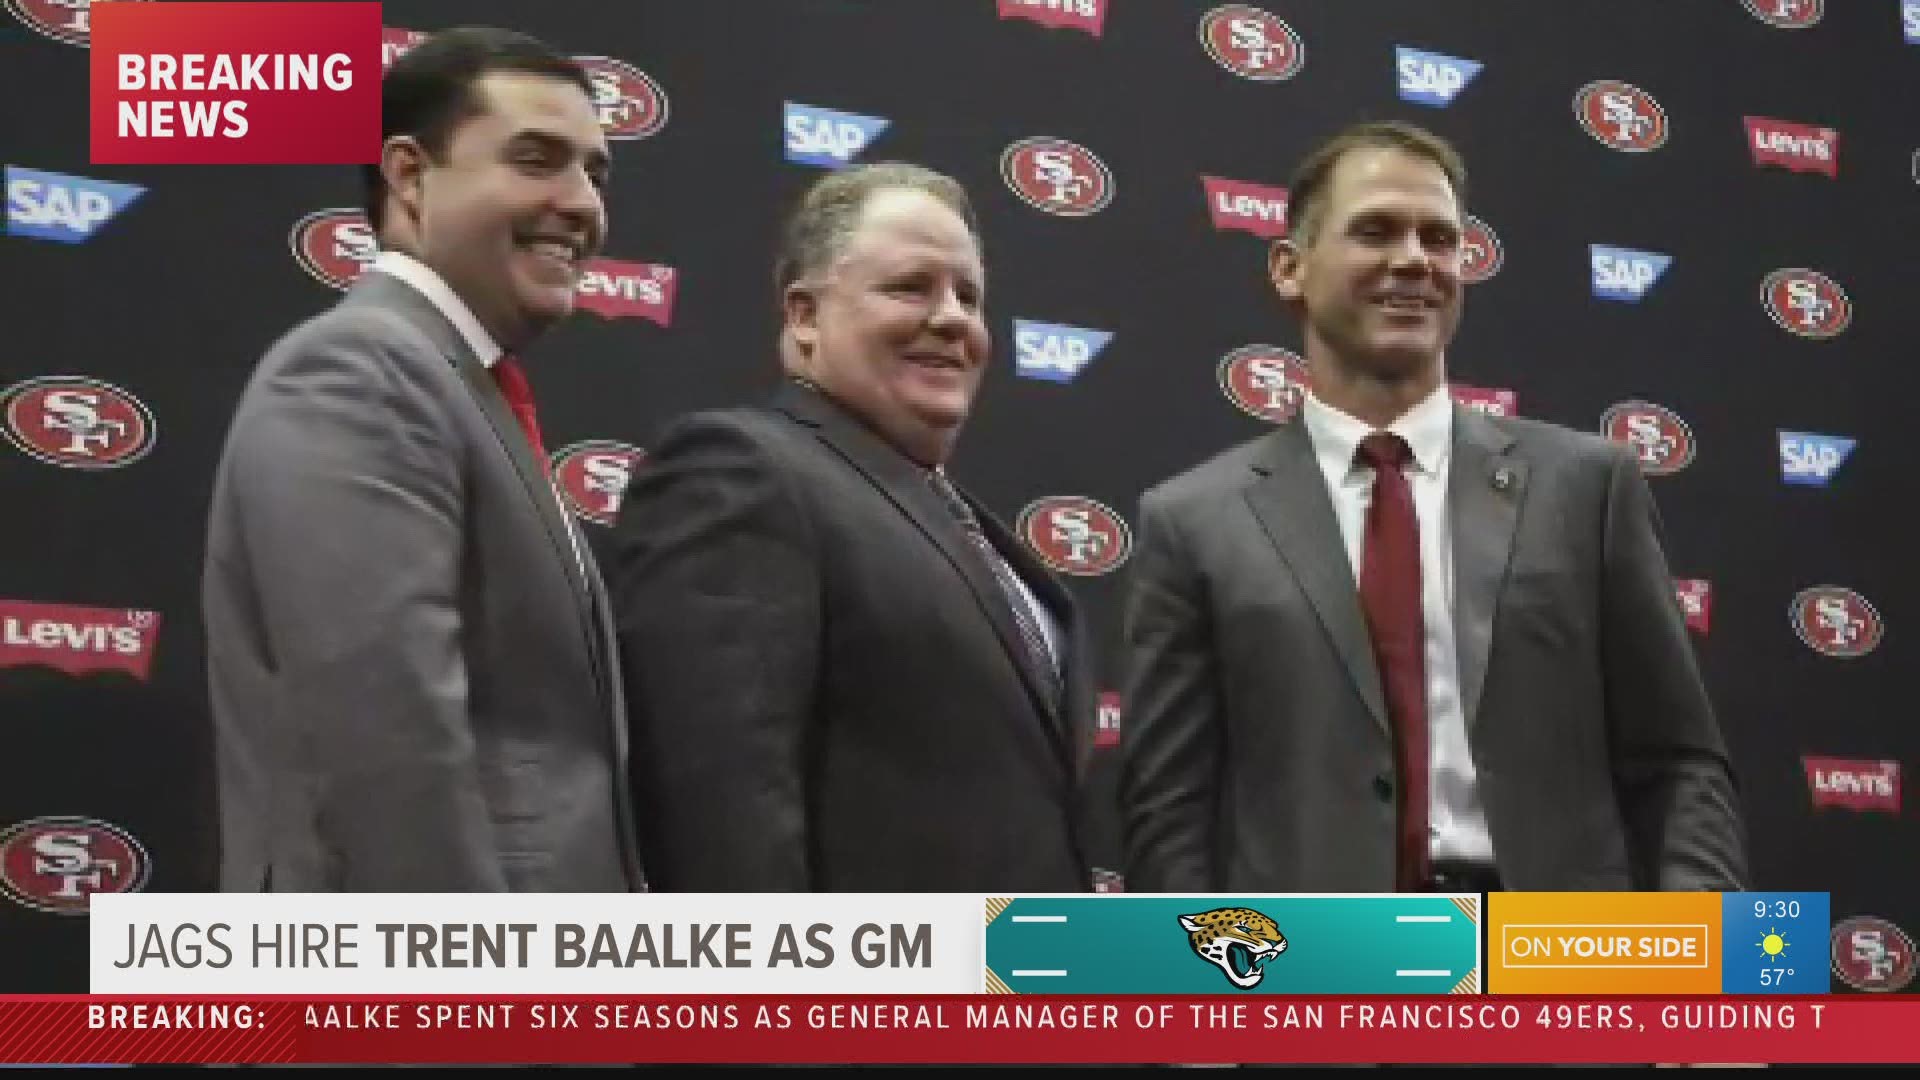 Baalke was named interim GM after Dave Caldwell was fired in November. He previously served as 49ers GM.